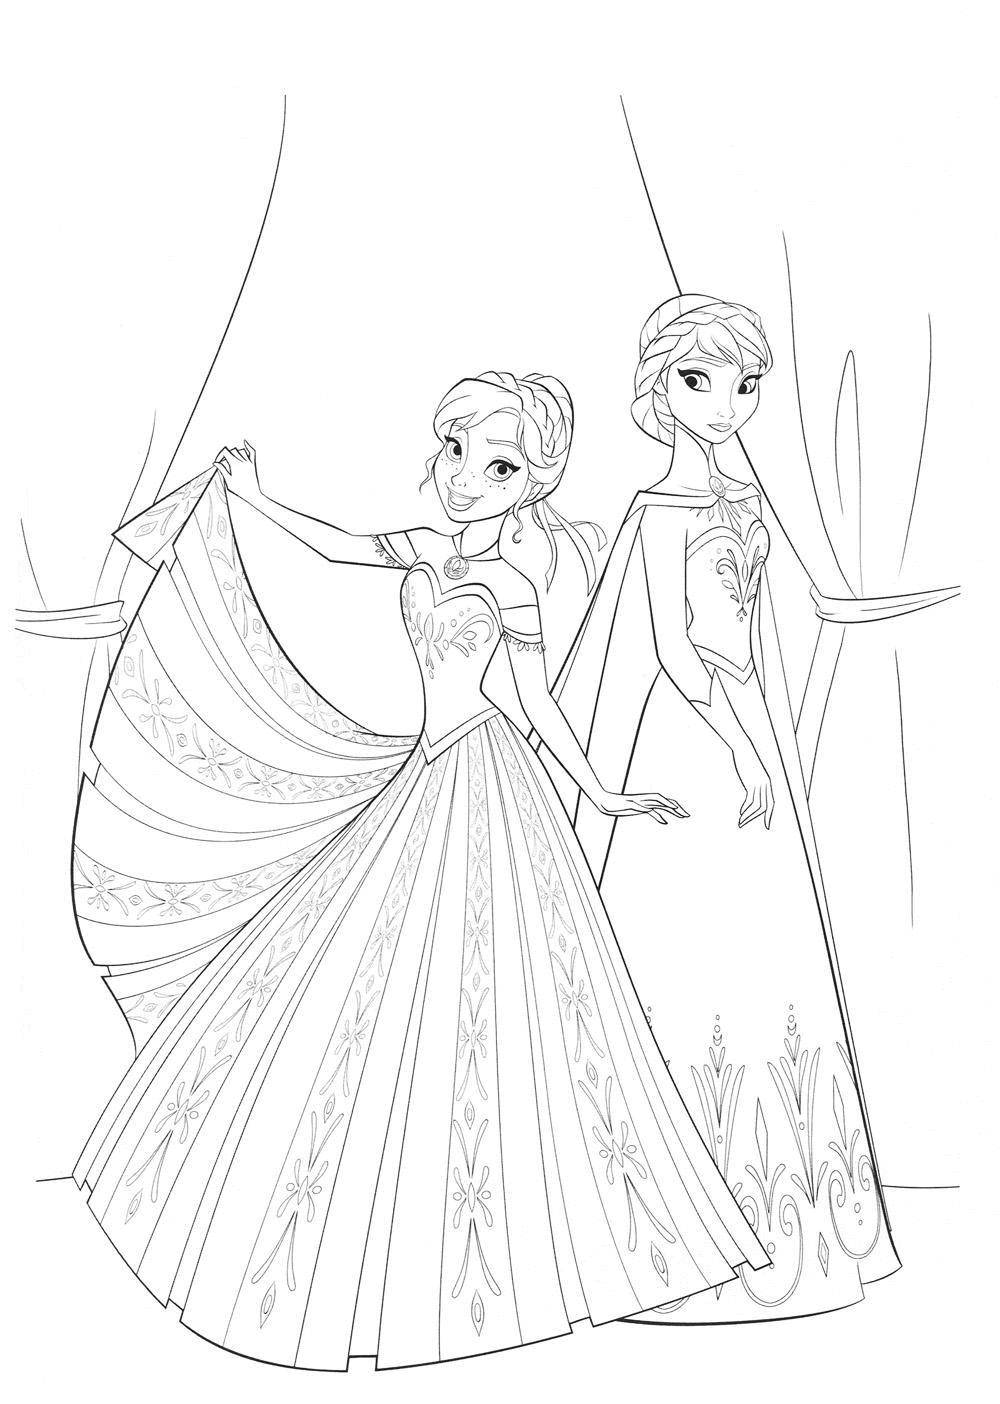 Coloring Cartoon characters cold heart. Category Fairy tales. Tags:  Disney, Elsa, frozen, Princess.